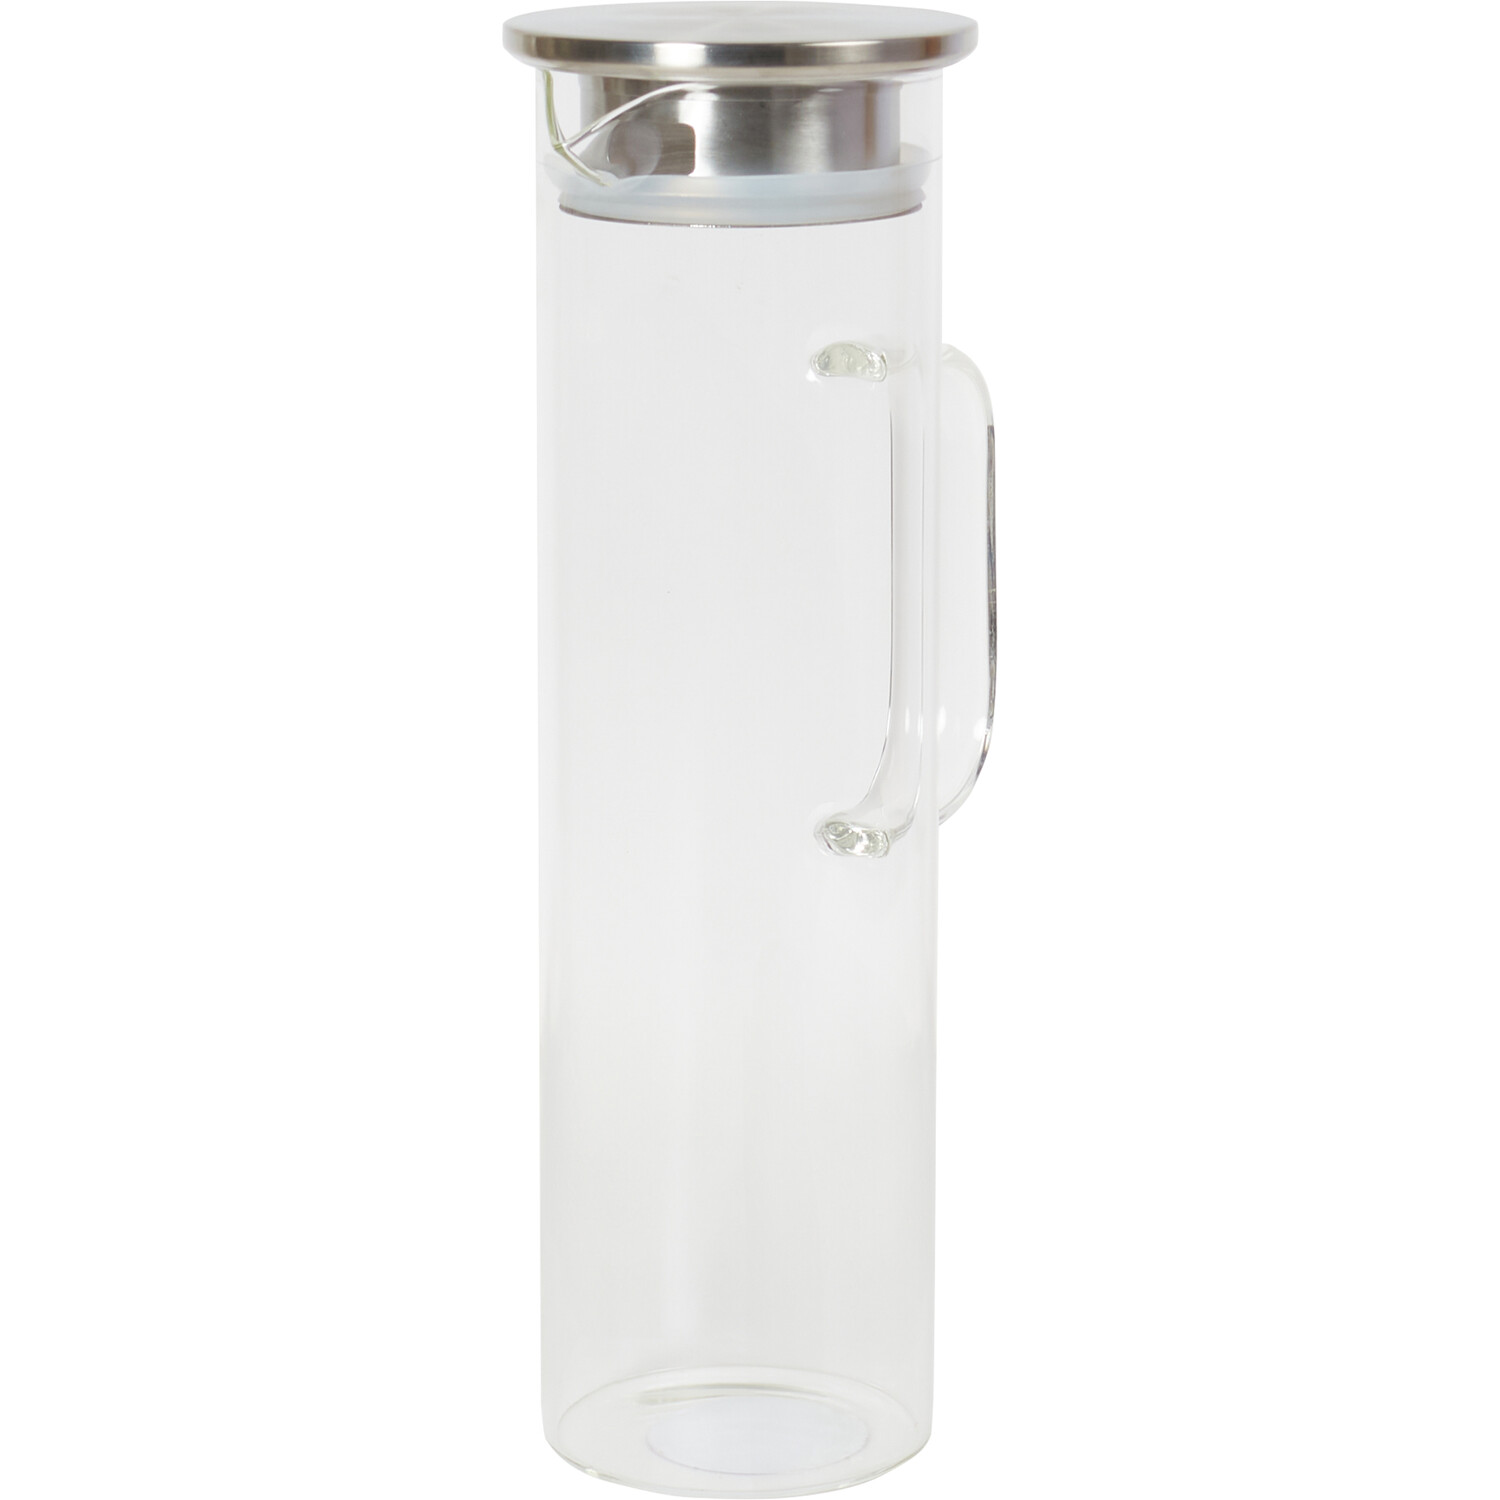 1.2L Glass Jug with Stainless Steel Lid - Clear Image 2